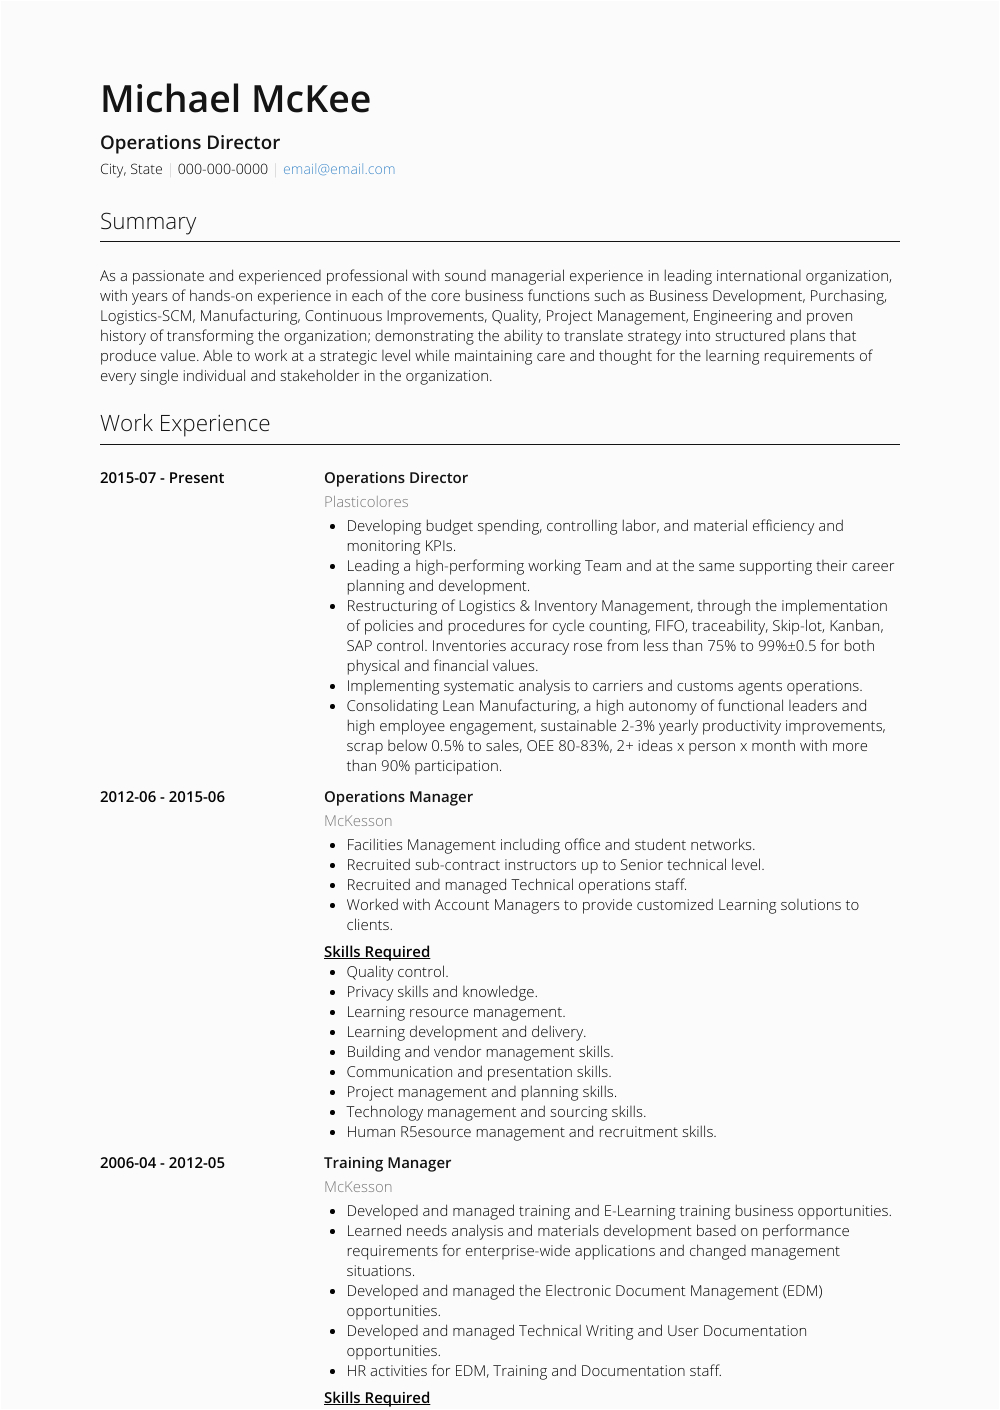 Resume Sample for A Directore Of Operations Operations Director Resume Samples and Templates